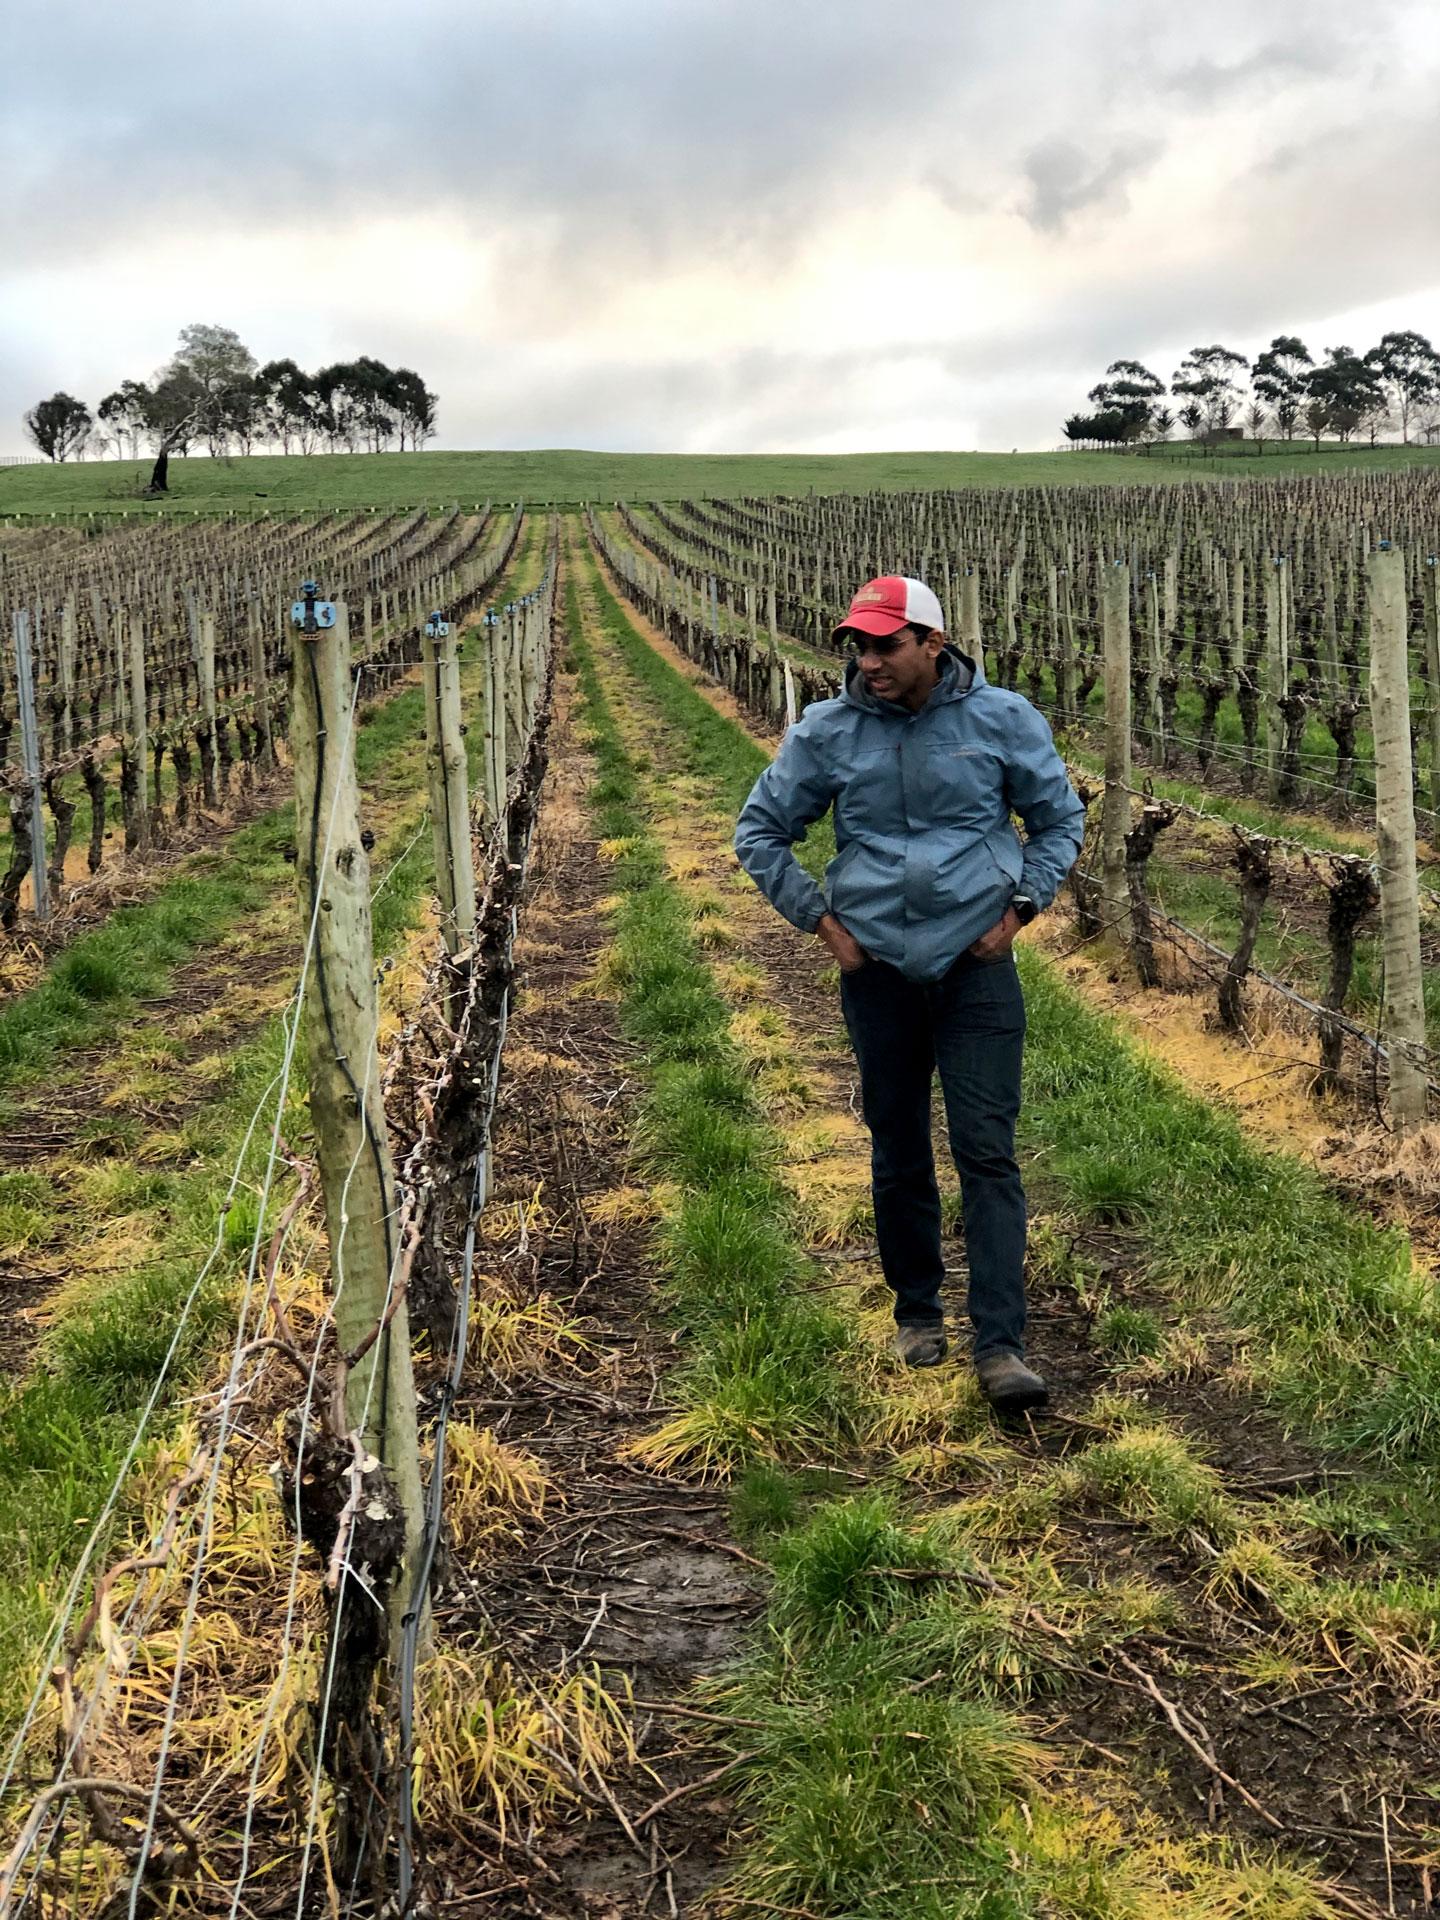 Dr Vinay Pagay, lecturer in viticulture and vineyard engineering from the School of Agriculture, Food and Wine at the University’s Waite campus